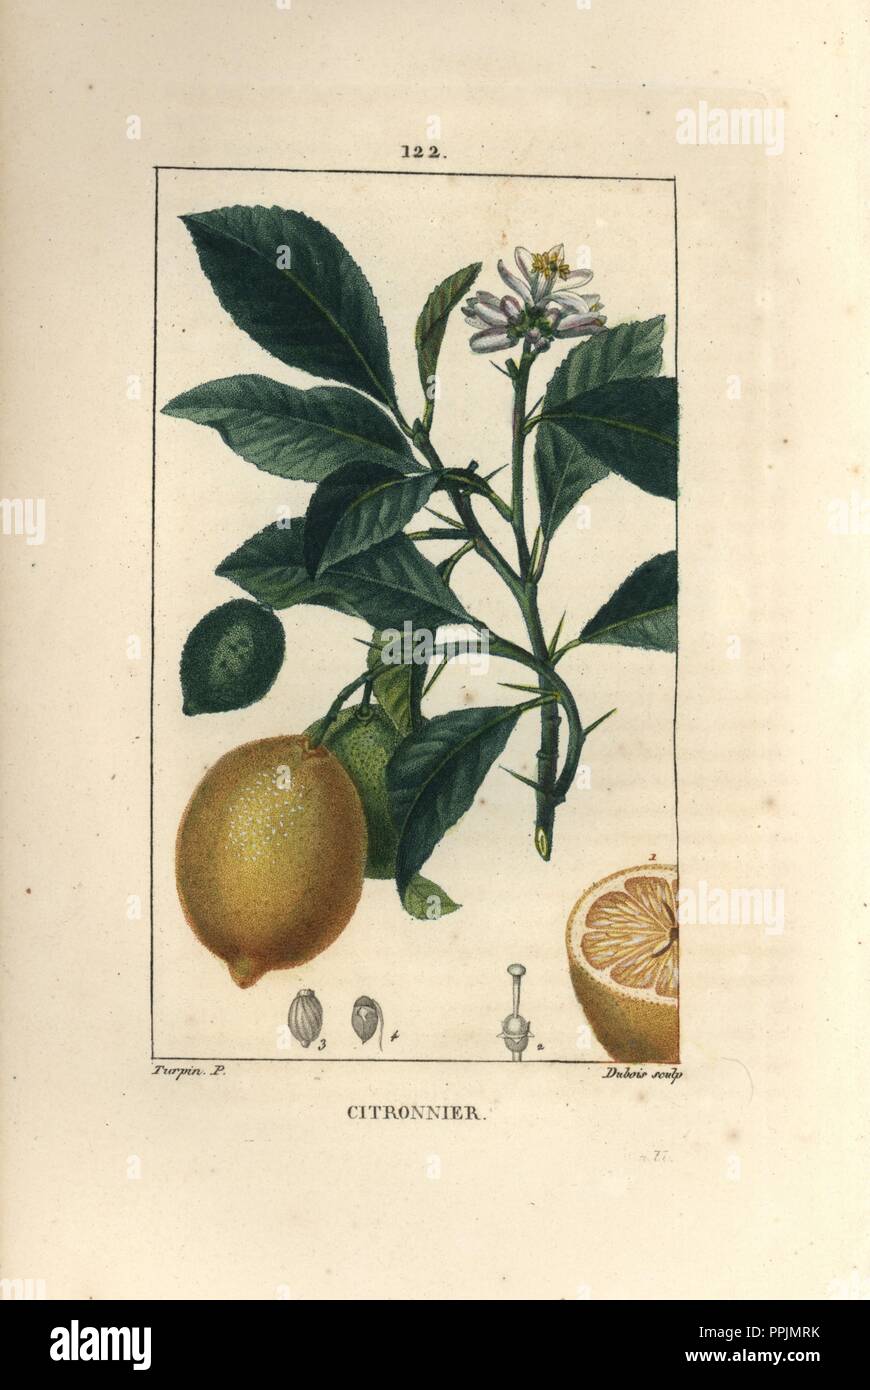 Citron, Citrus medica, with flower, branch, green fruit, ripe yellow fruit and section. Handcoloured stipple copperplate engraving by Dubois from a drawing by Pierre Jean-Francois Turpin from Chaumeton, Poiret et Chamberet's 'La Flore Medicale,' Paris, Panckoucke, 1830. Turpin (17751840) was one of the three giants of French botanical art of the era alongside Pierre Joseph Redoute and Pancrace Bessa. Stock Photo